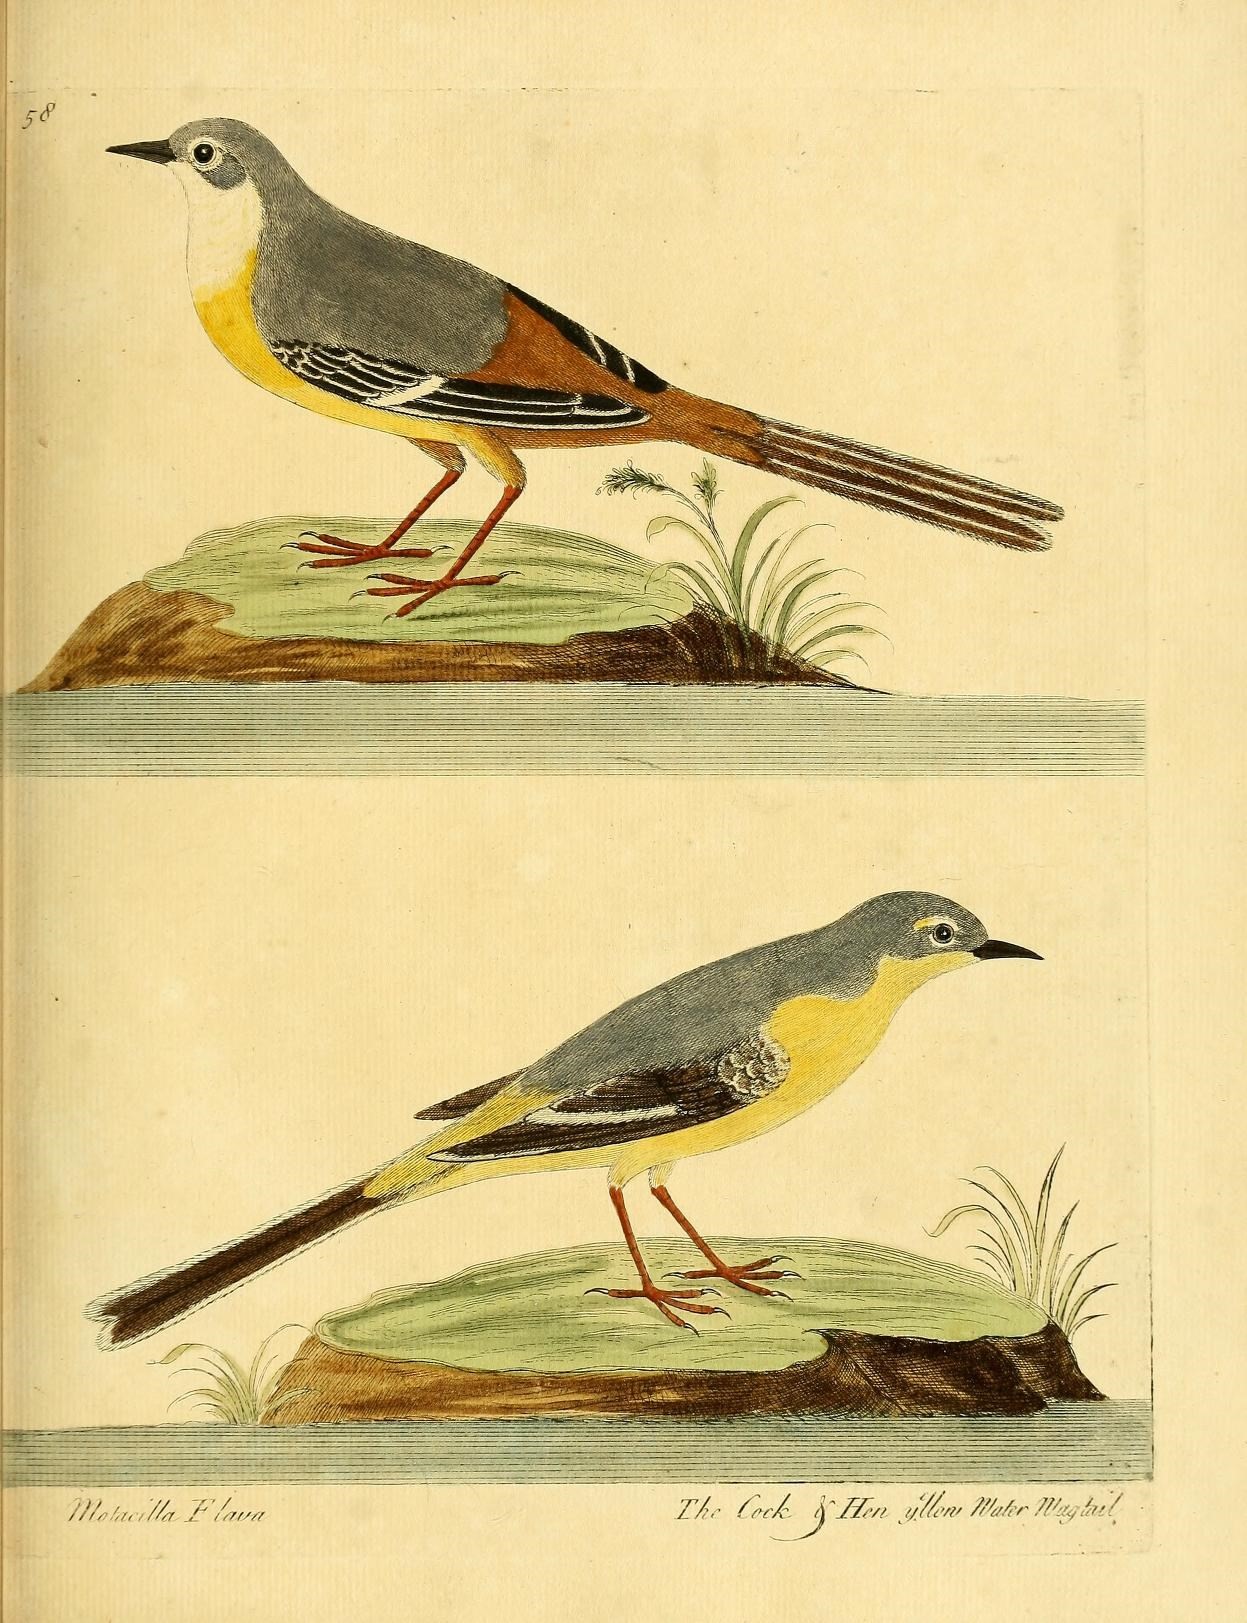 two yellow brown and gray birds standing on a field